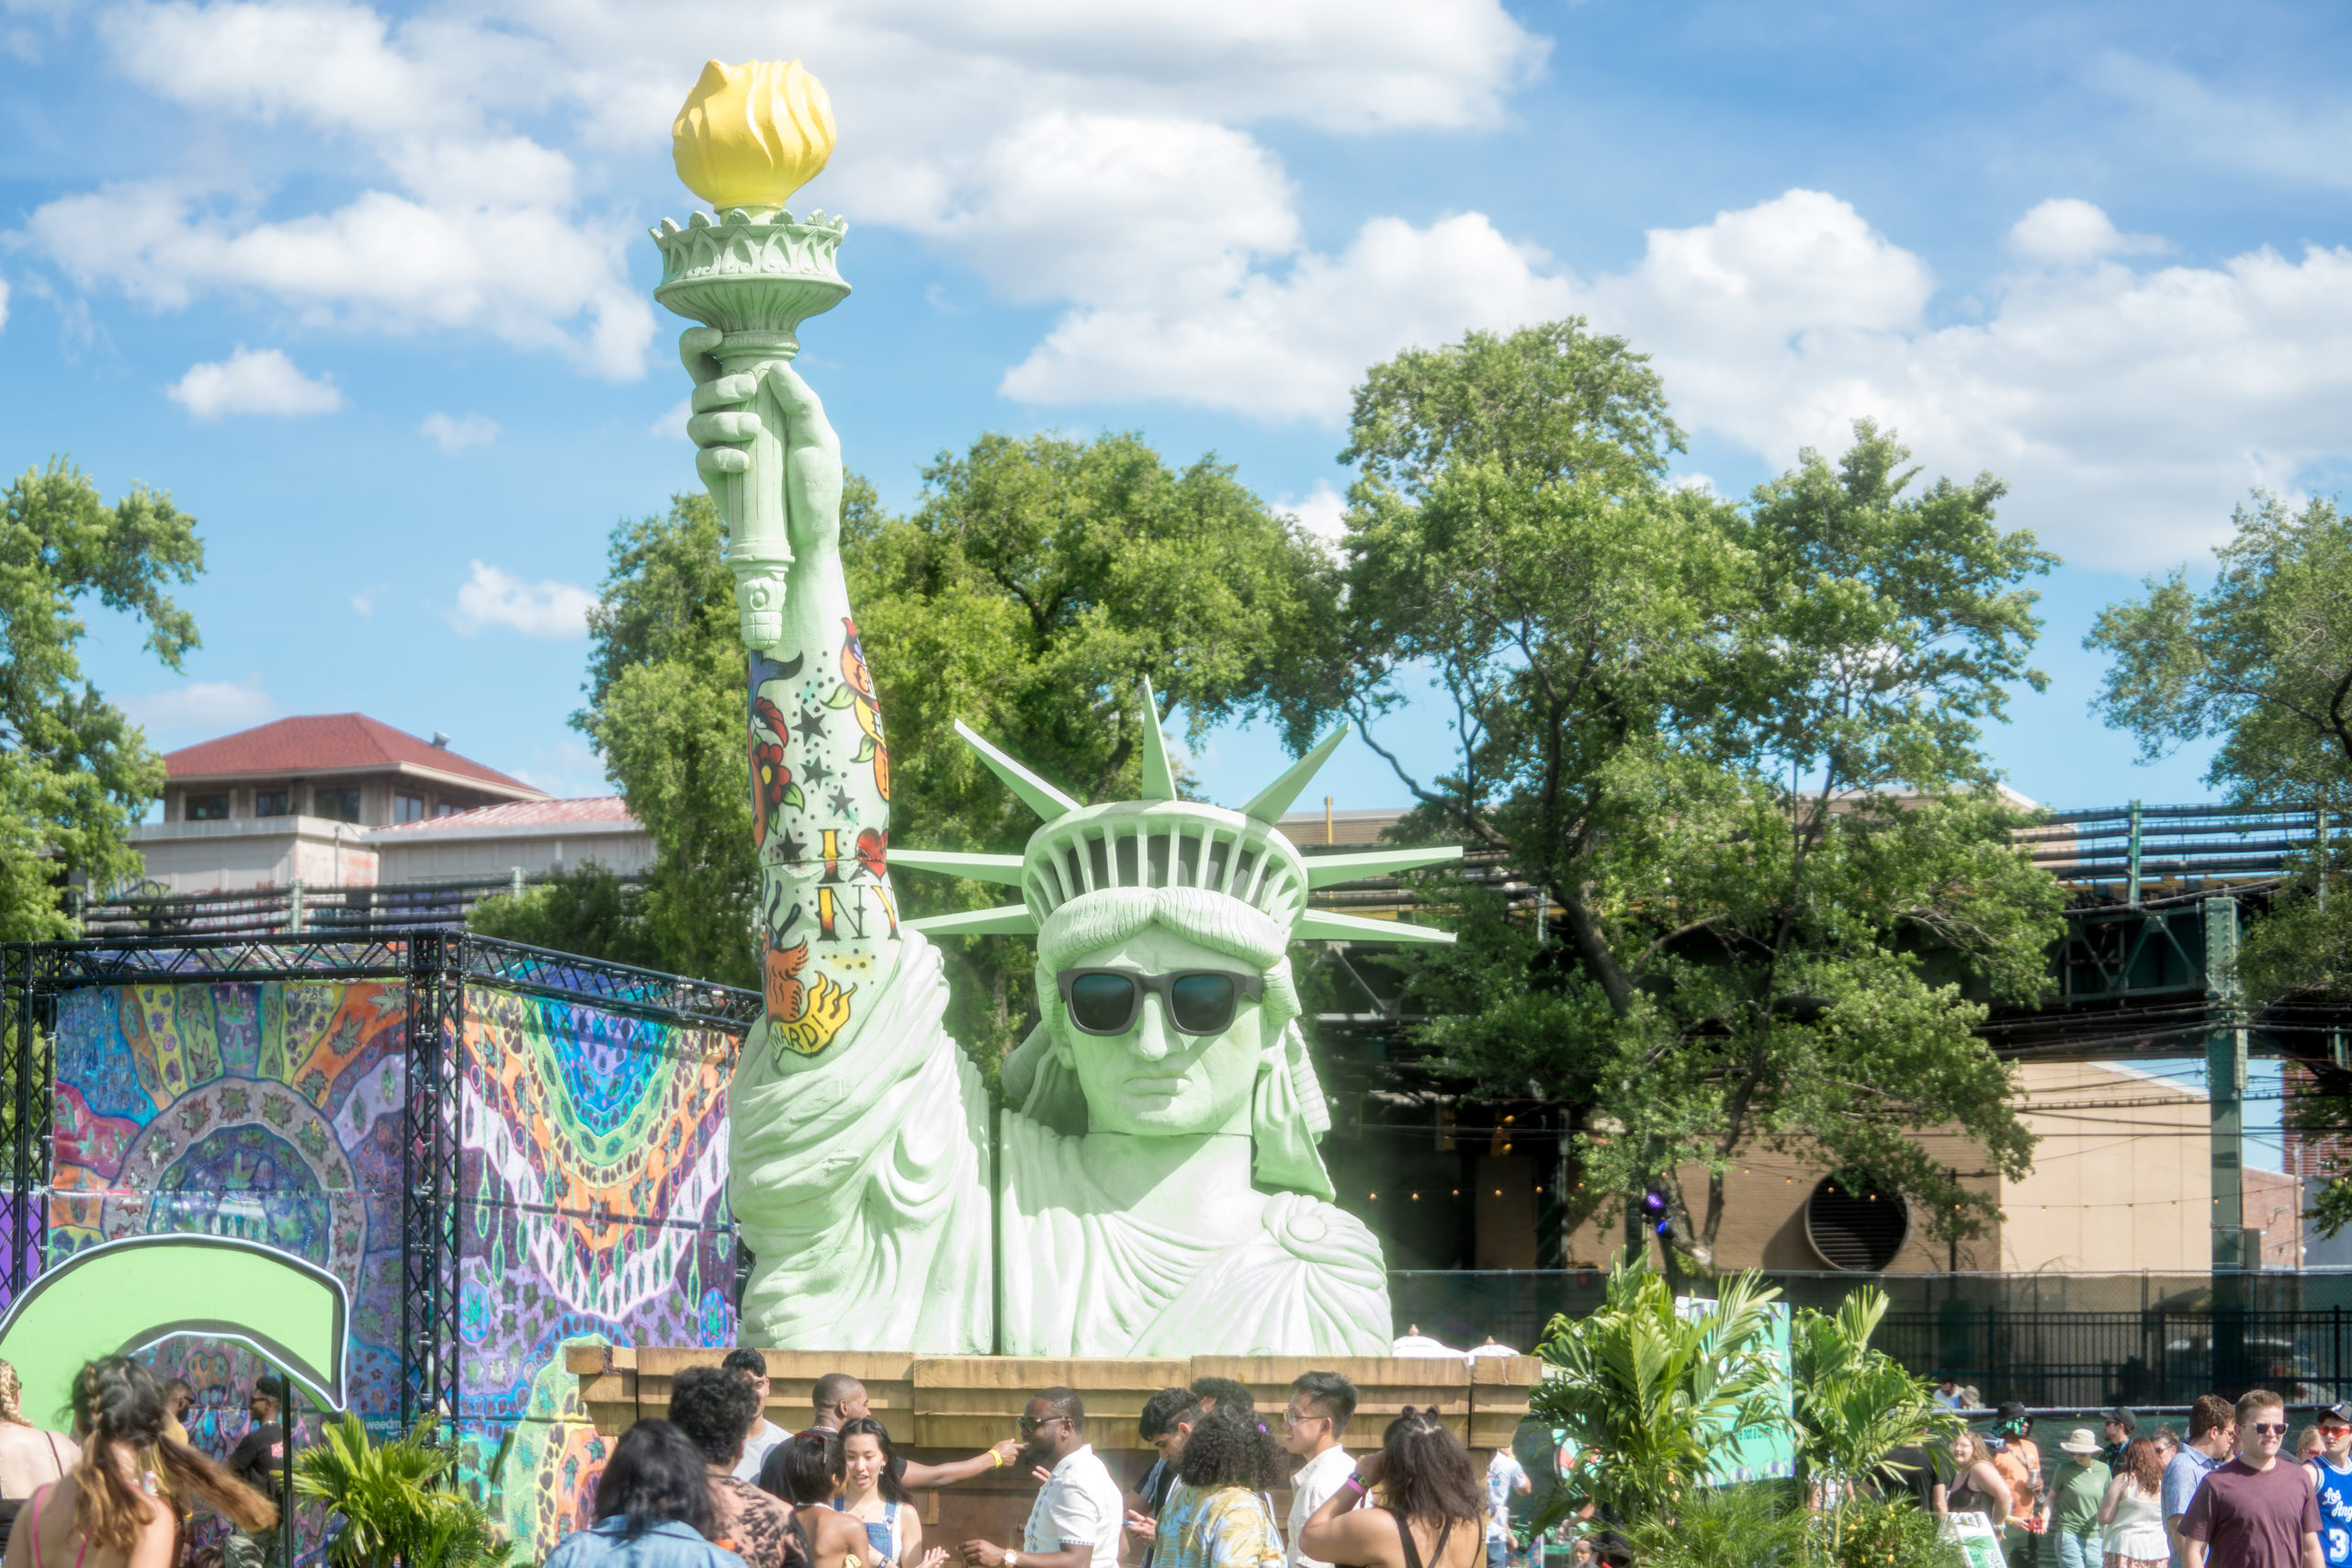 Governors Ball 2022 Event Review and Photo Gallery